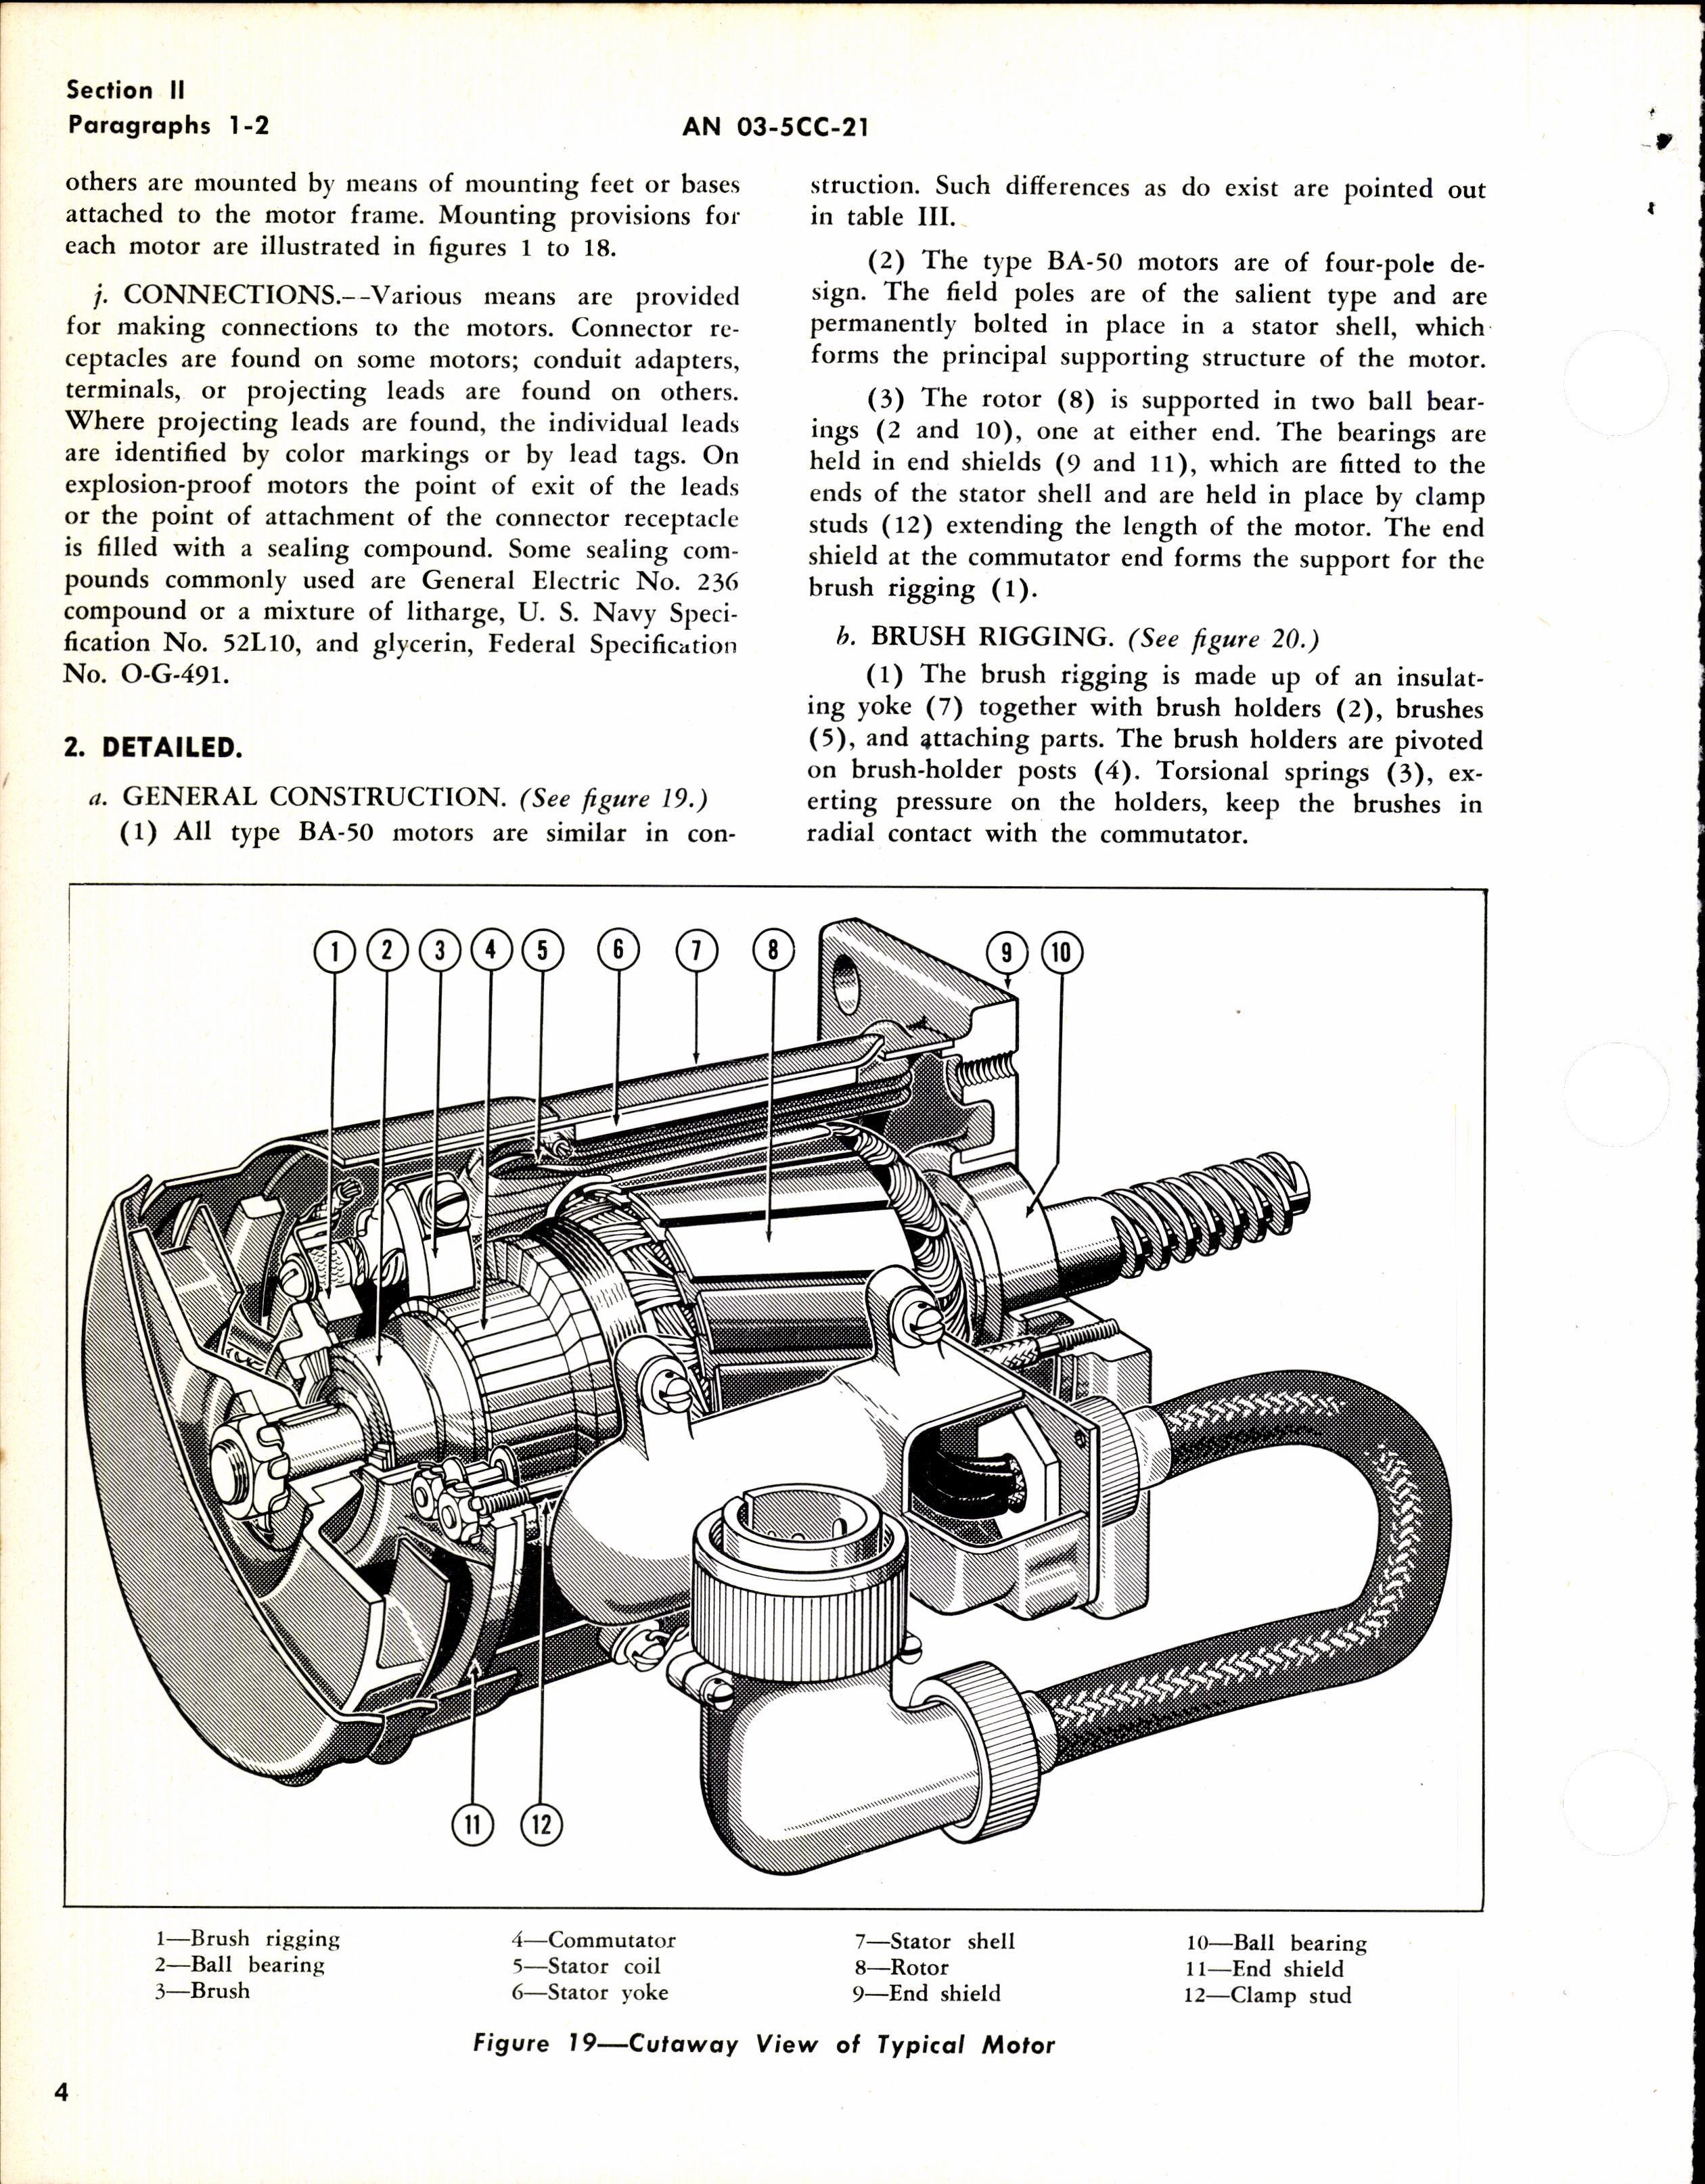 Sample page 6 from AirCorps Library document: Handbook of Instructions with Parts Catalog for Model 5BA50 Series Electric Motors